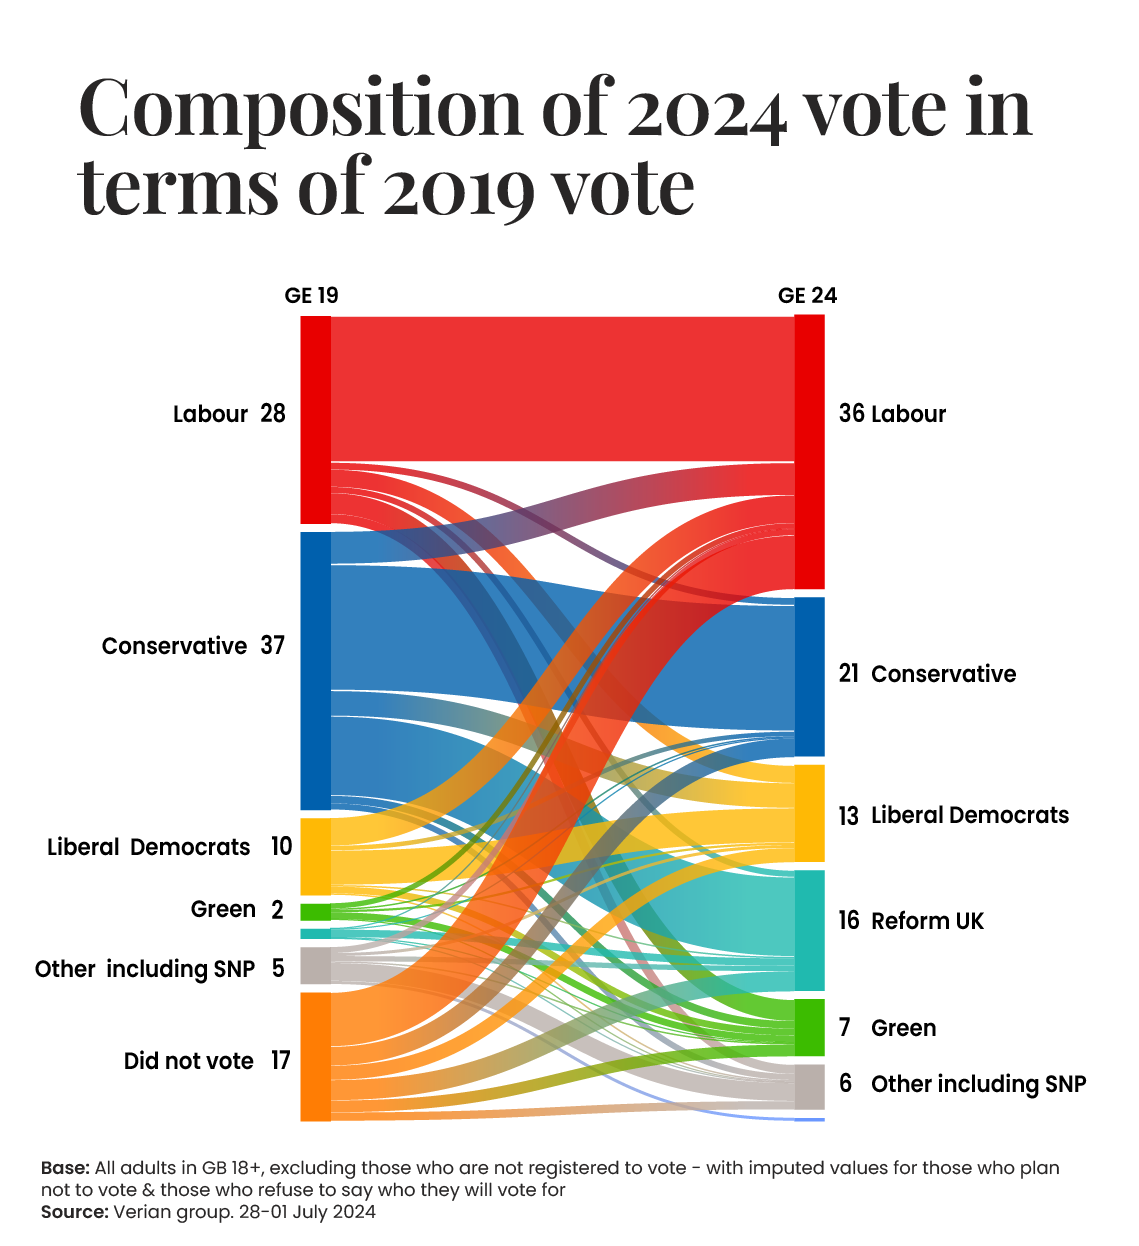 Sankey of composition of 2024 vote in terms of 2019 vote